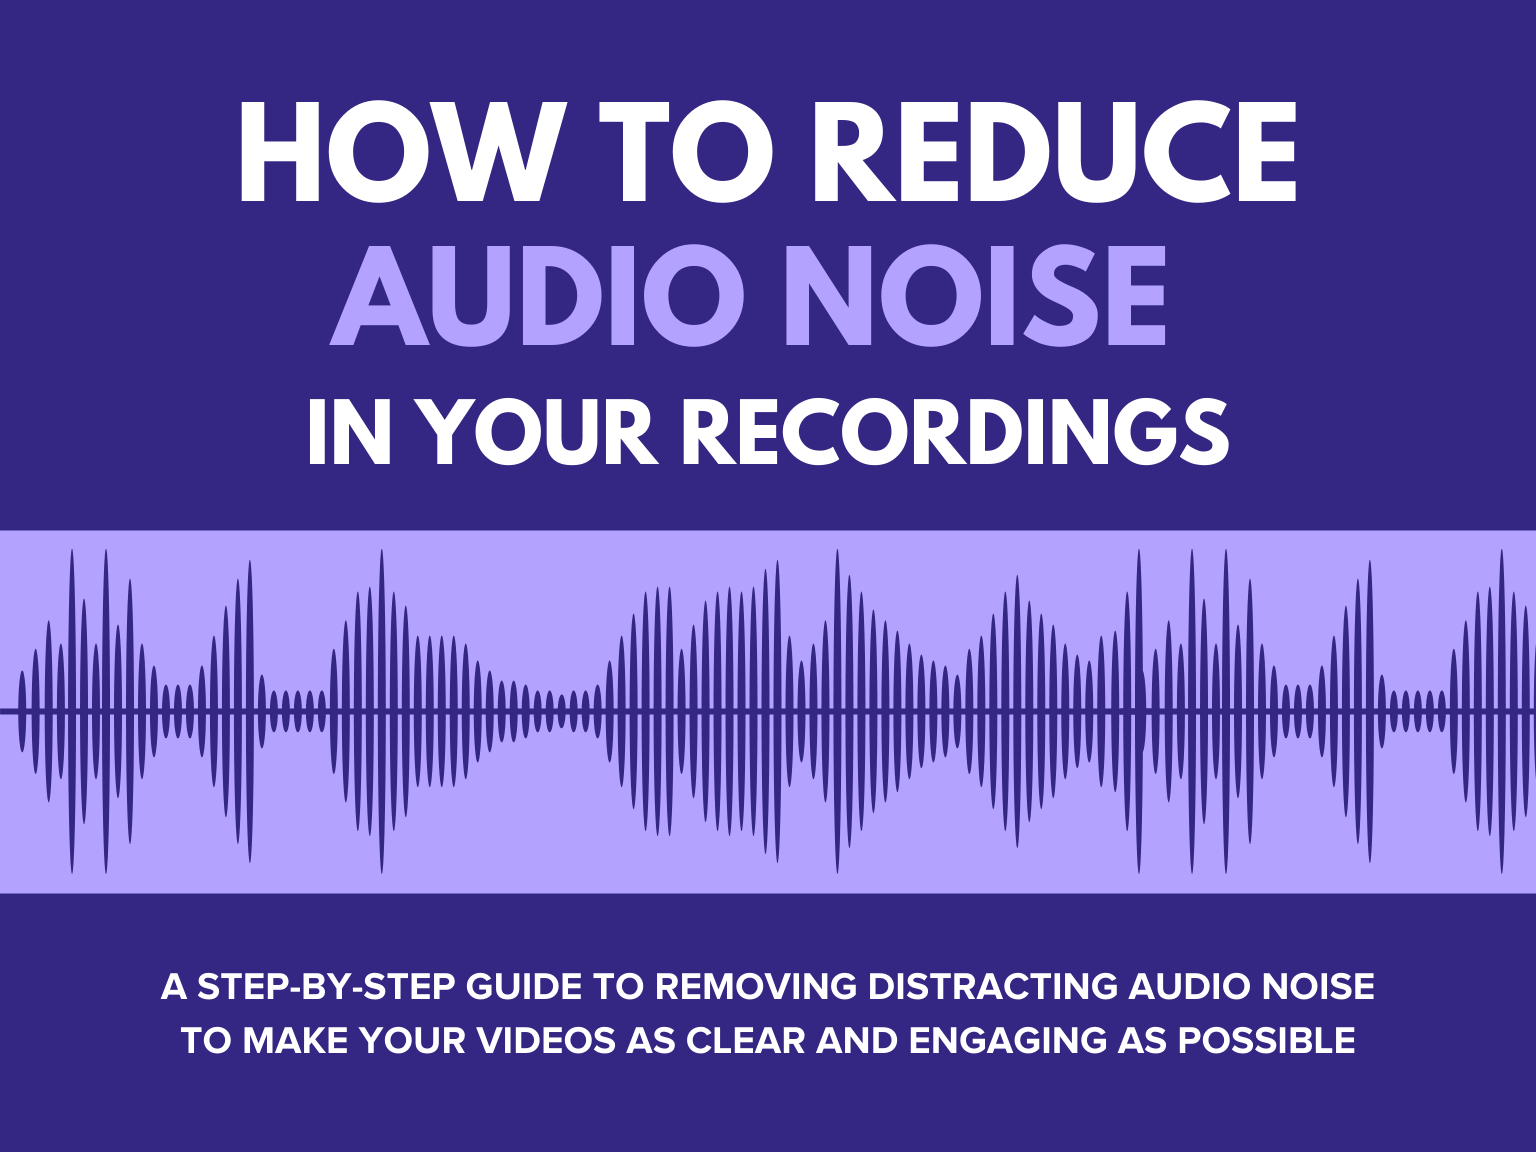 How to Reduce Audio Noise in Your Recordings   The TechSmith Blog